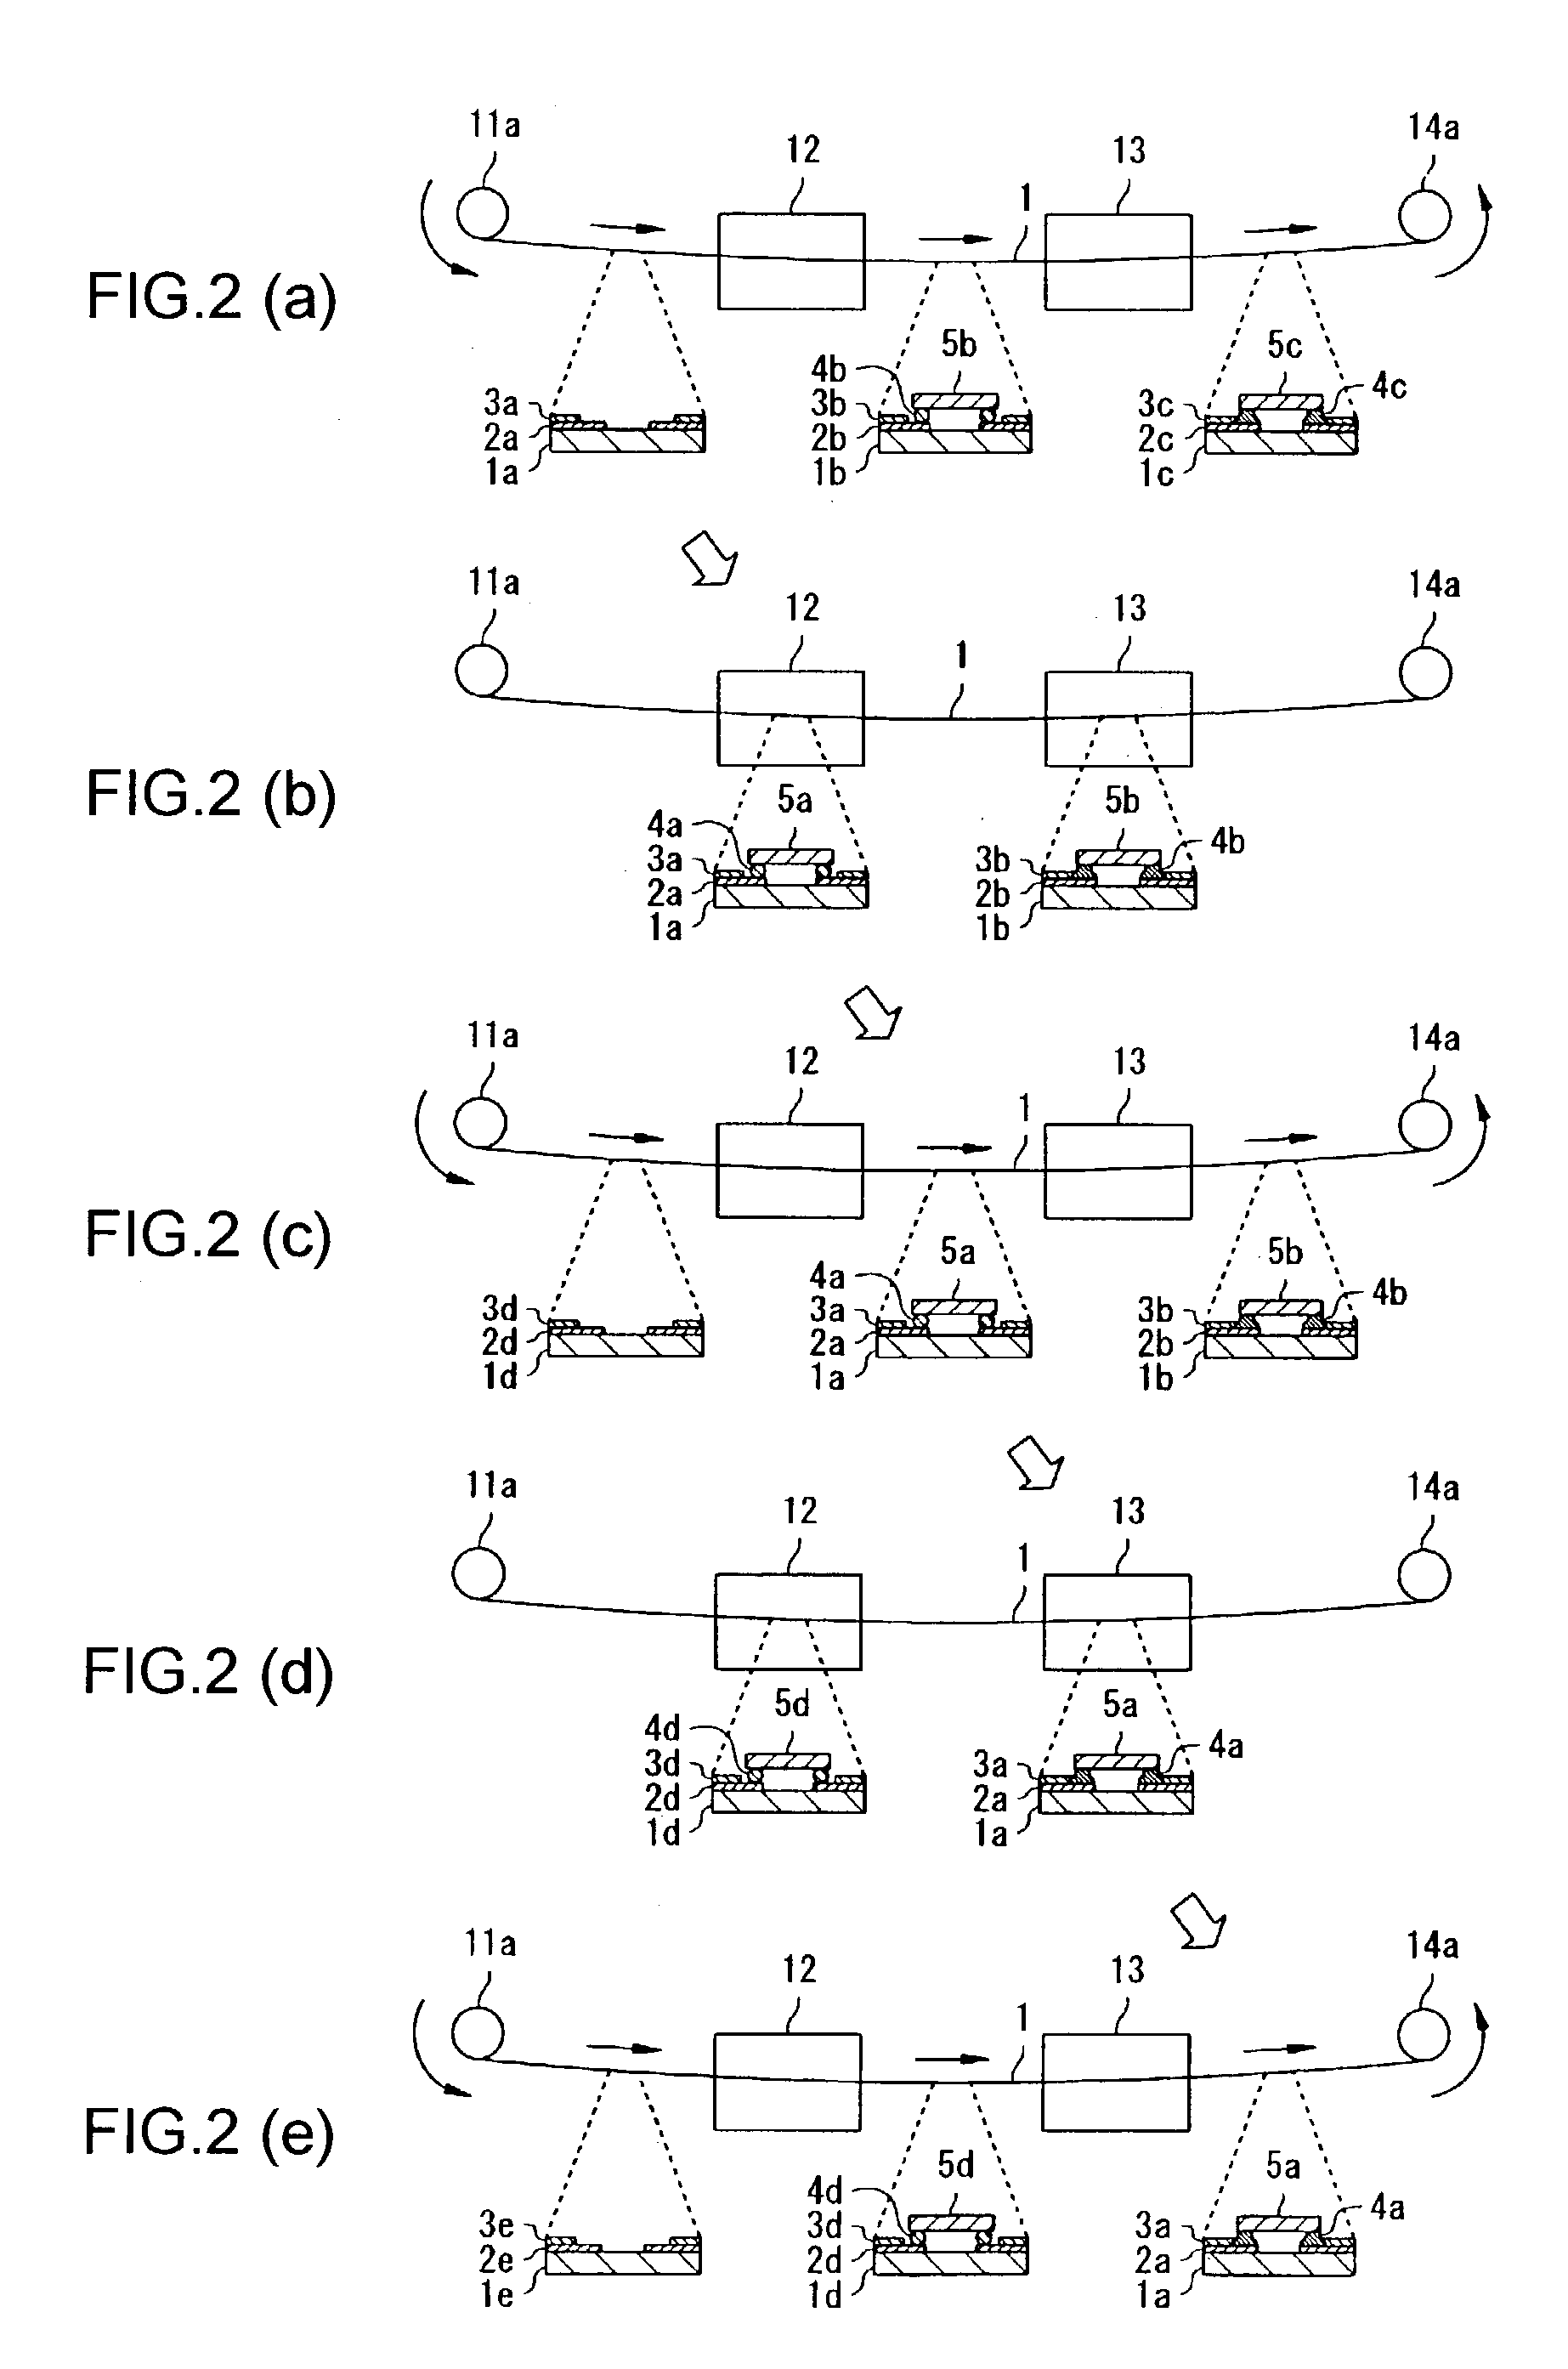 Apparatus for manufacturing an electronic device, method of manufacturing an electronic device, and program for manufacturing an electronic device